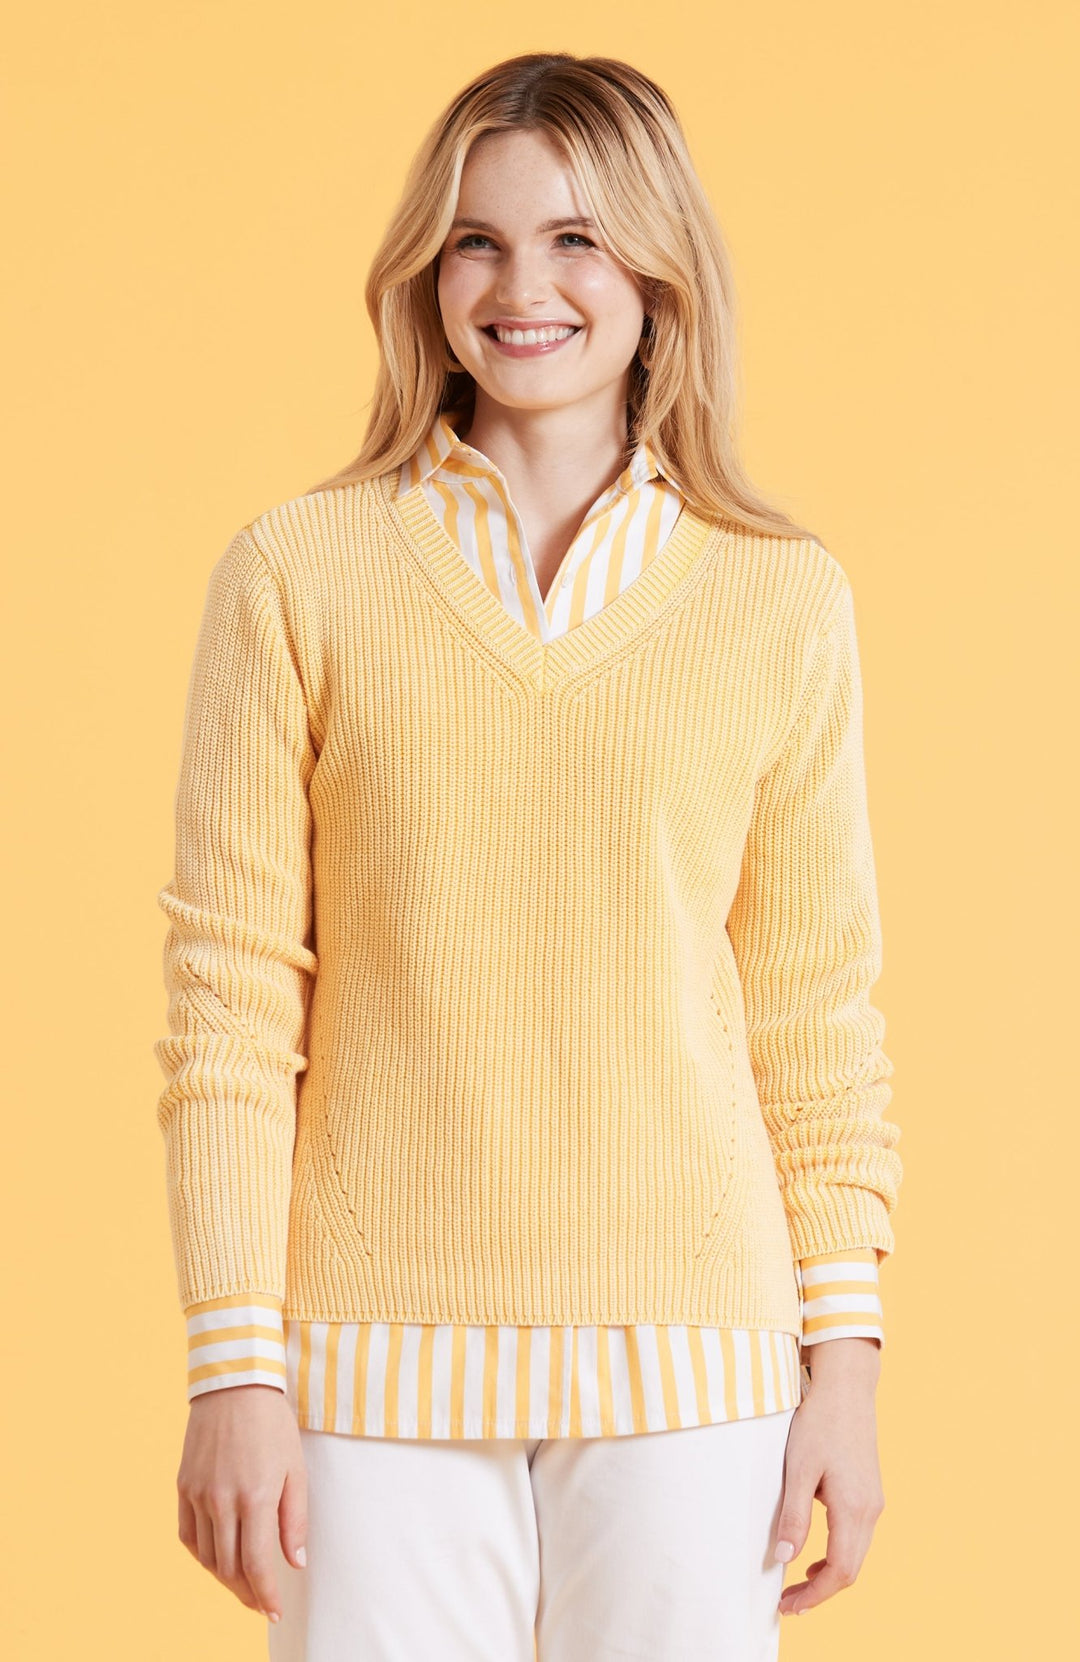 Tyler Boe - Mineral Wash VNeck Shaker Sweater: Sunshine Yellow - Shorely Chic Boutique